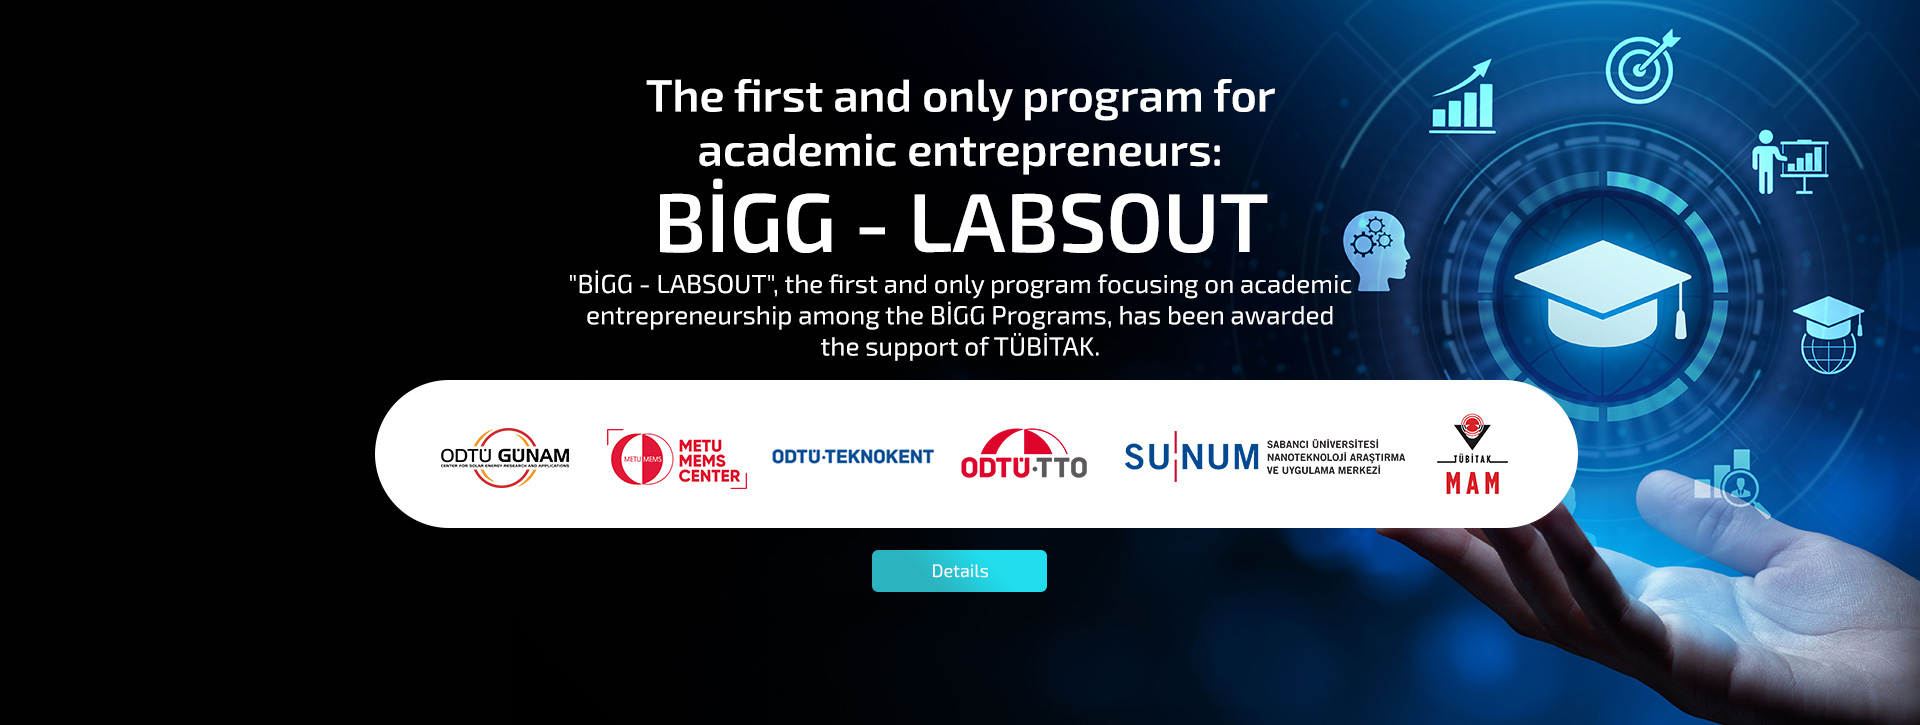 The first and only program for academic entrepreneurs: BİGG - LABSOUT